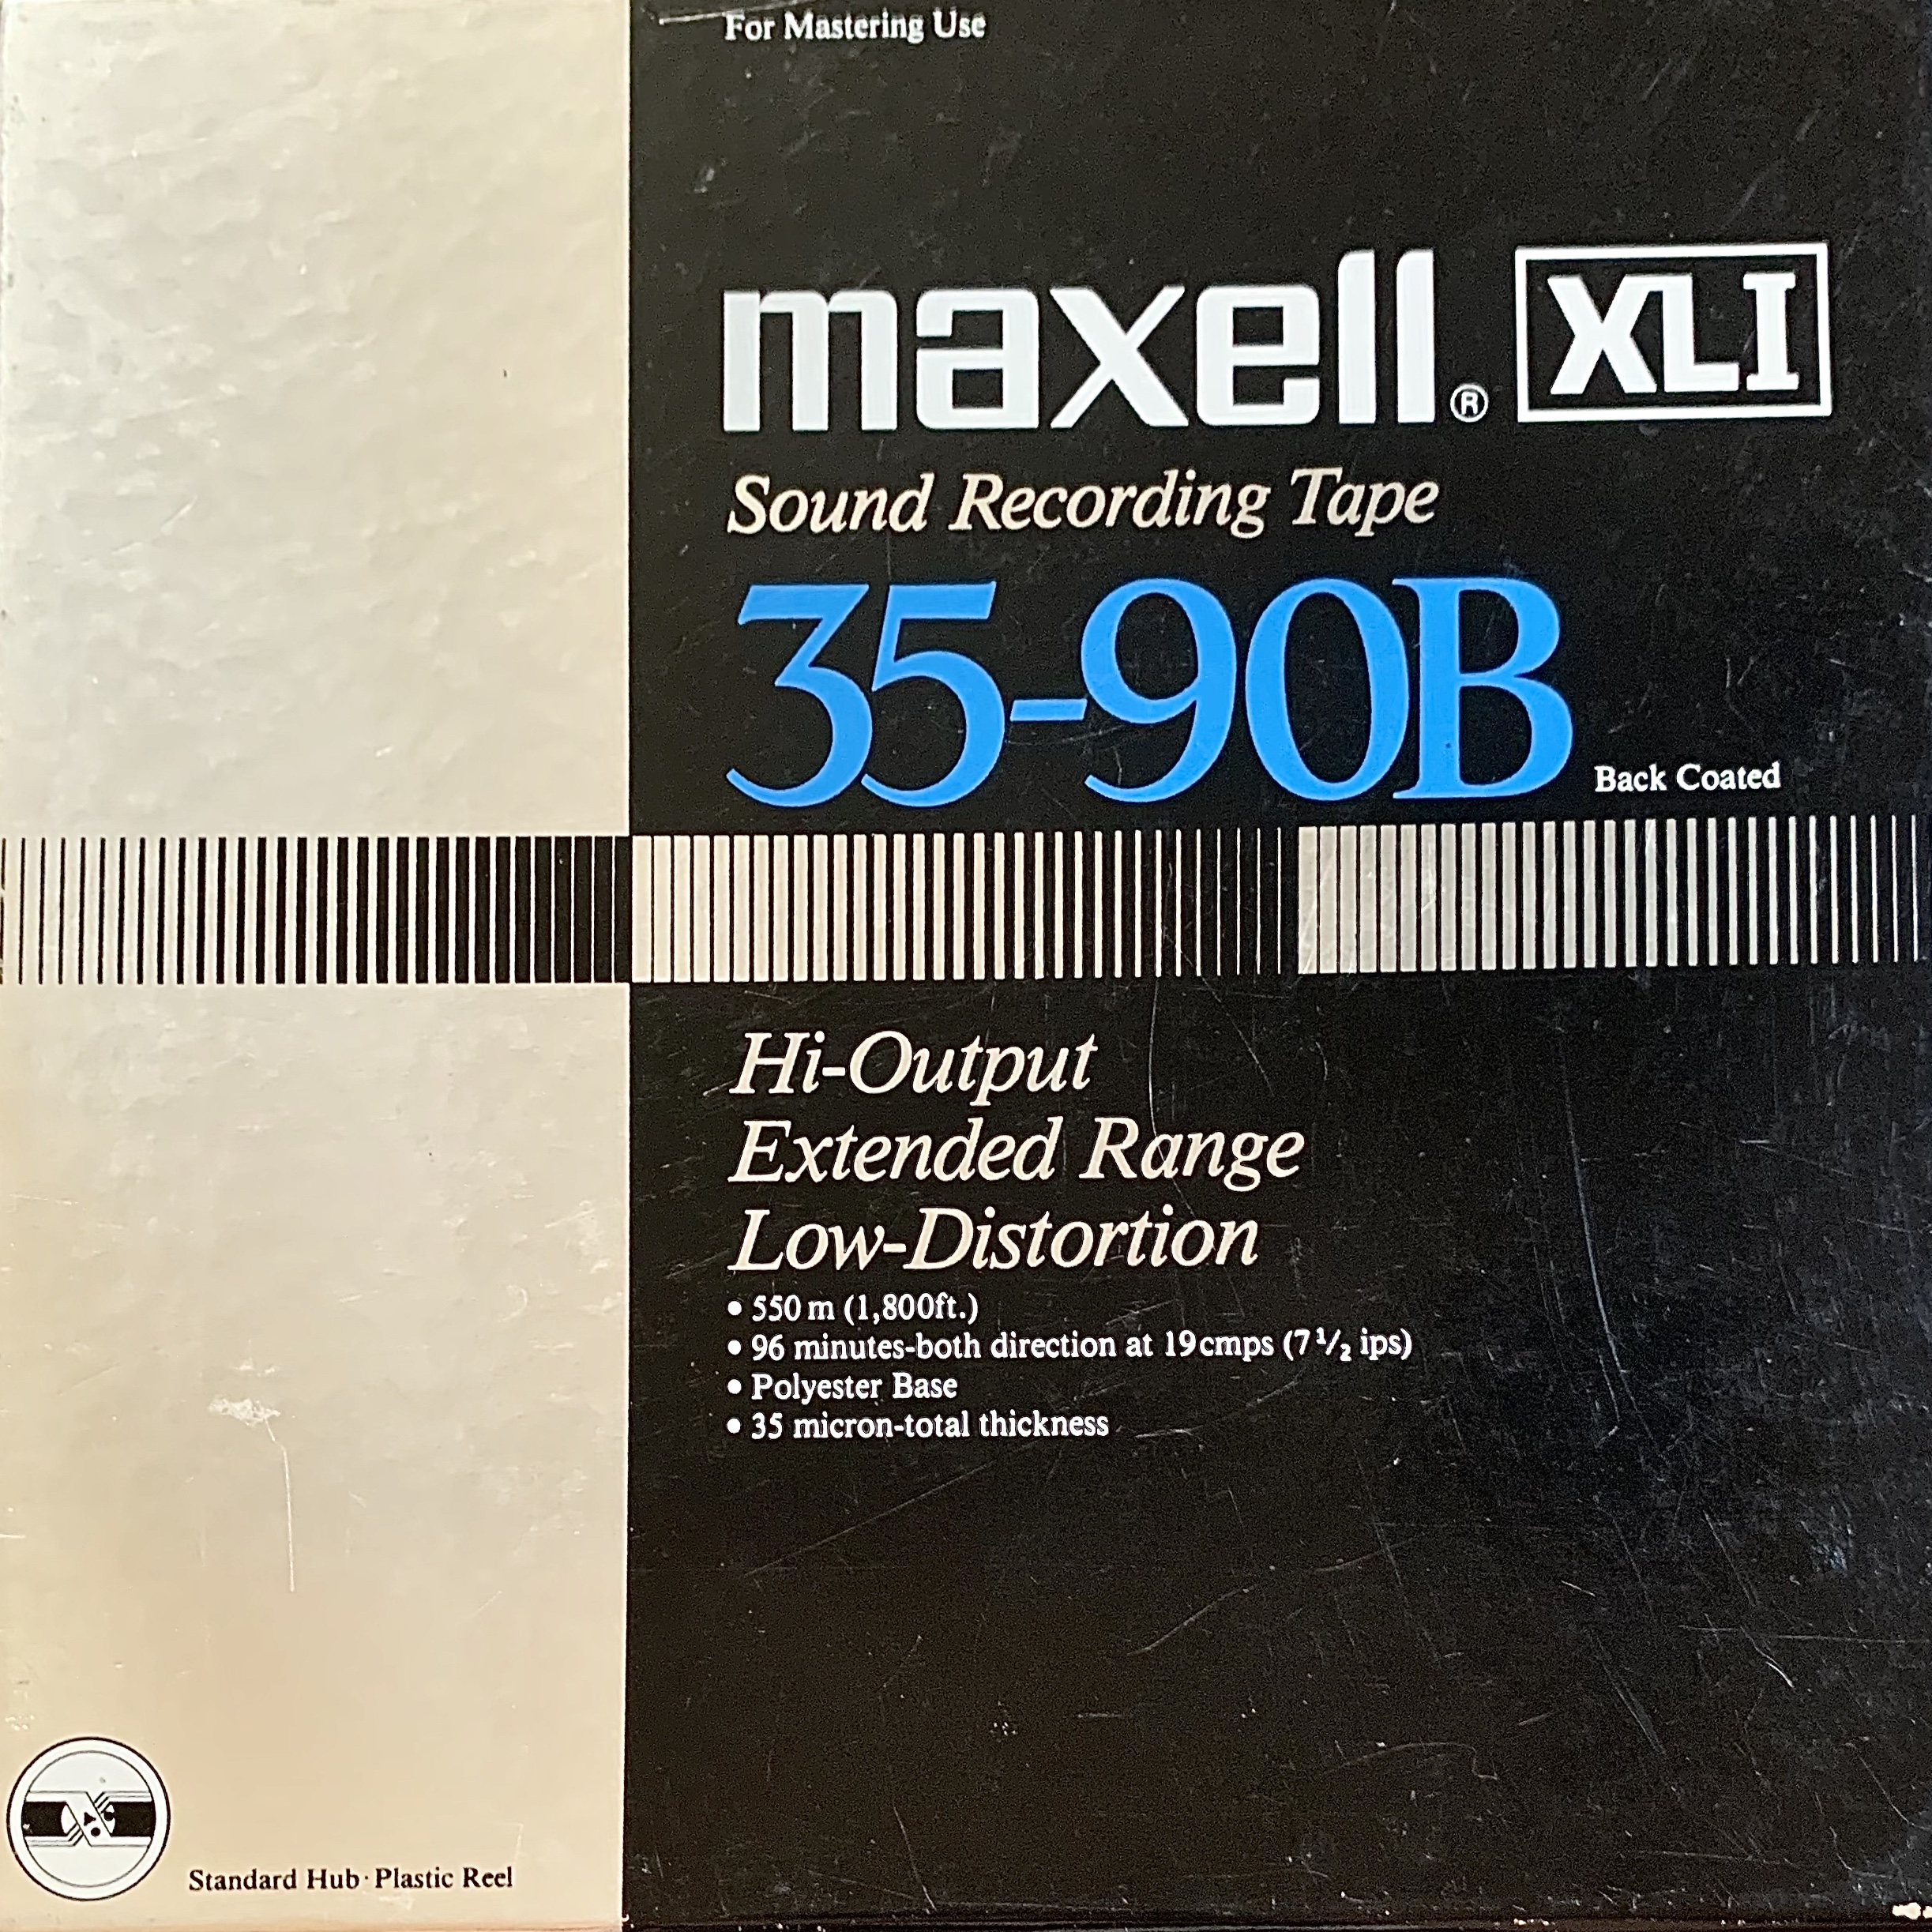 Maxell UD 35-90 Reel to Reel Sound Recording Tape 7 lot4. - Helia Beer Co